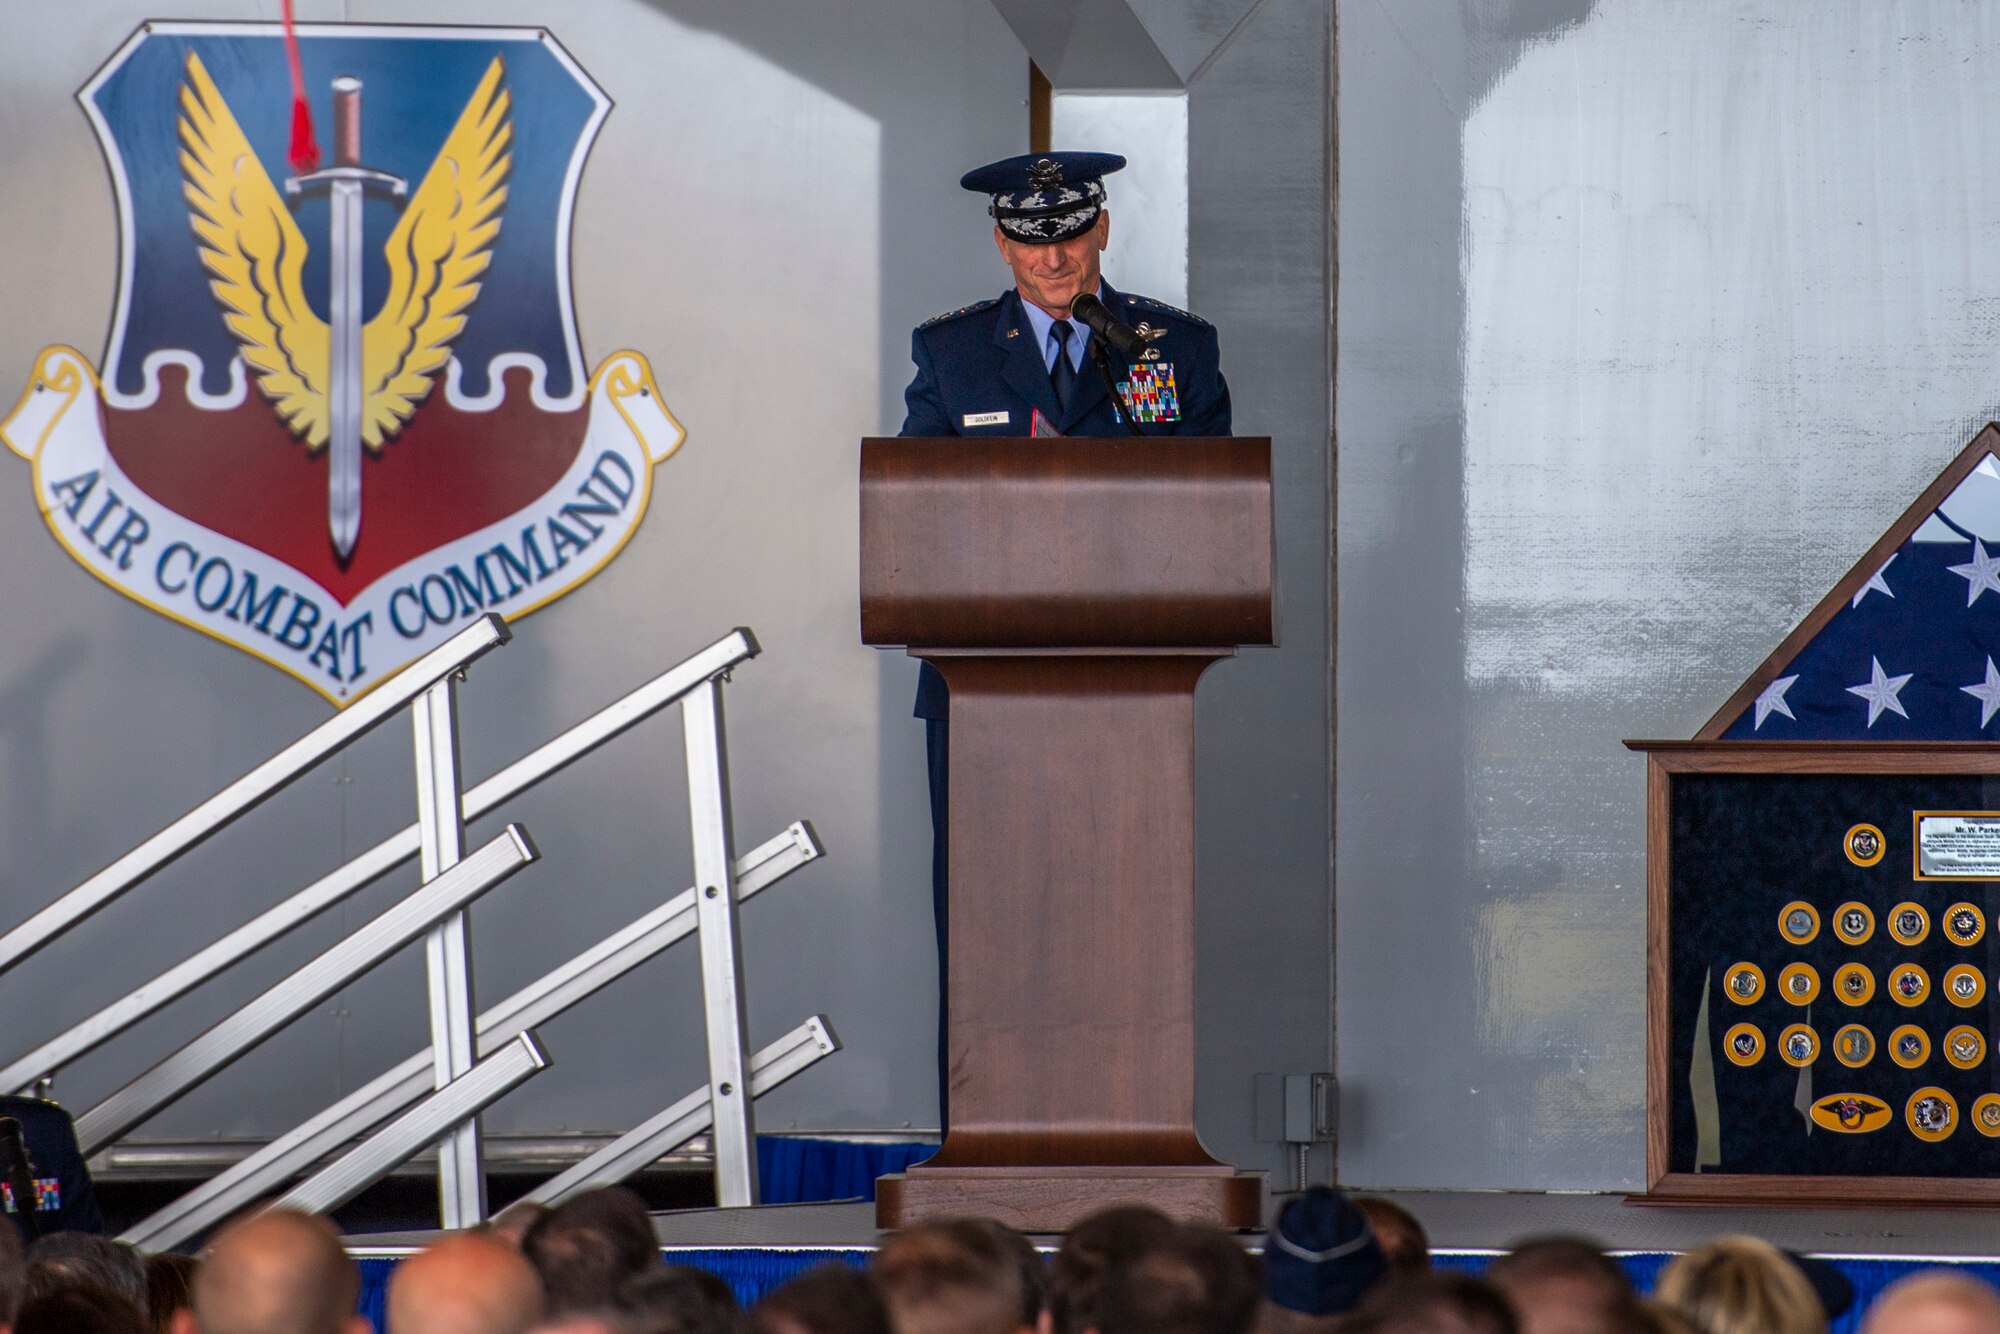 Air Force Chief of Staff Gen. David L. Goldfein speaks at the Celebration of Life ceremony honoring the late W. Parker Greene, March 14, 2019, at Moody Air Force Base, Ga. The event was held in honor of Mr. Greene and his unwavering support to Moody, the local community and the entire Air Force for more than 40 years. Mr. Greene, a steadfast Air Force advocate and one of the most influential military civic leaders, passed away Dec. 18, 2018. (U.S. Air Force photo by Airman 1st Class Joseph Leveille)